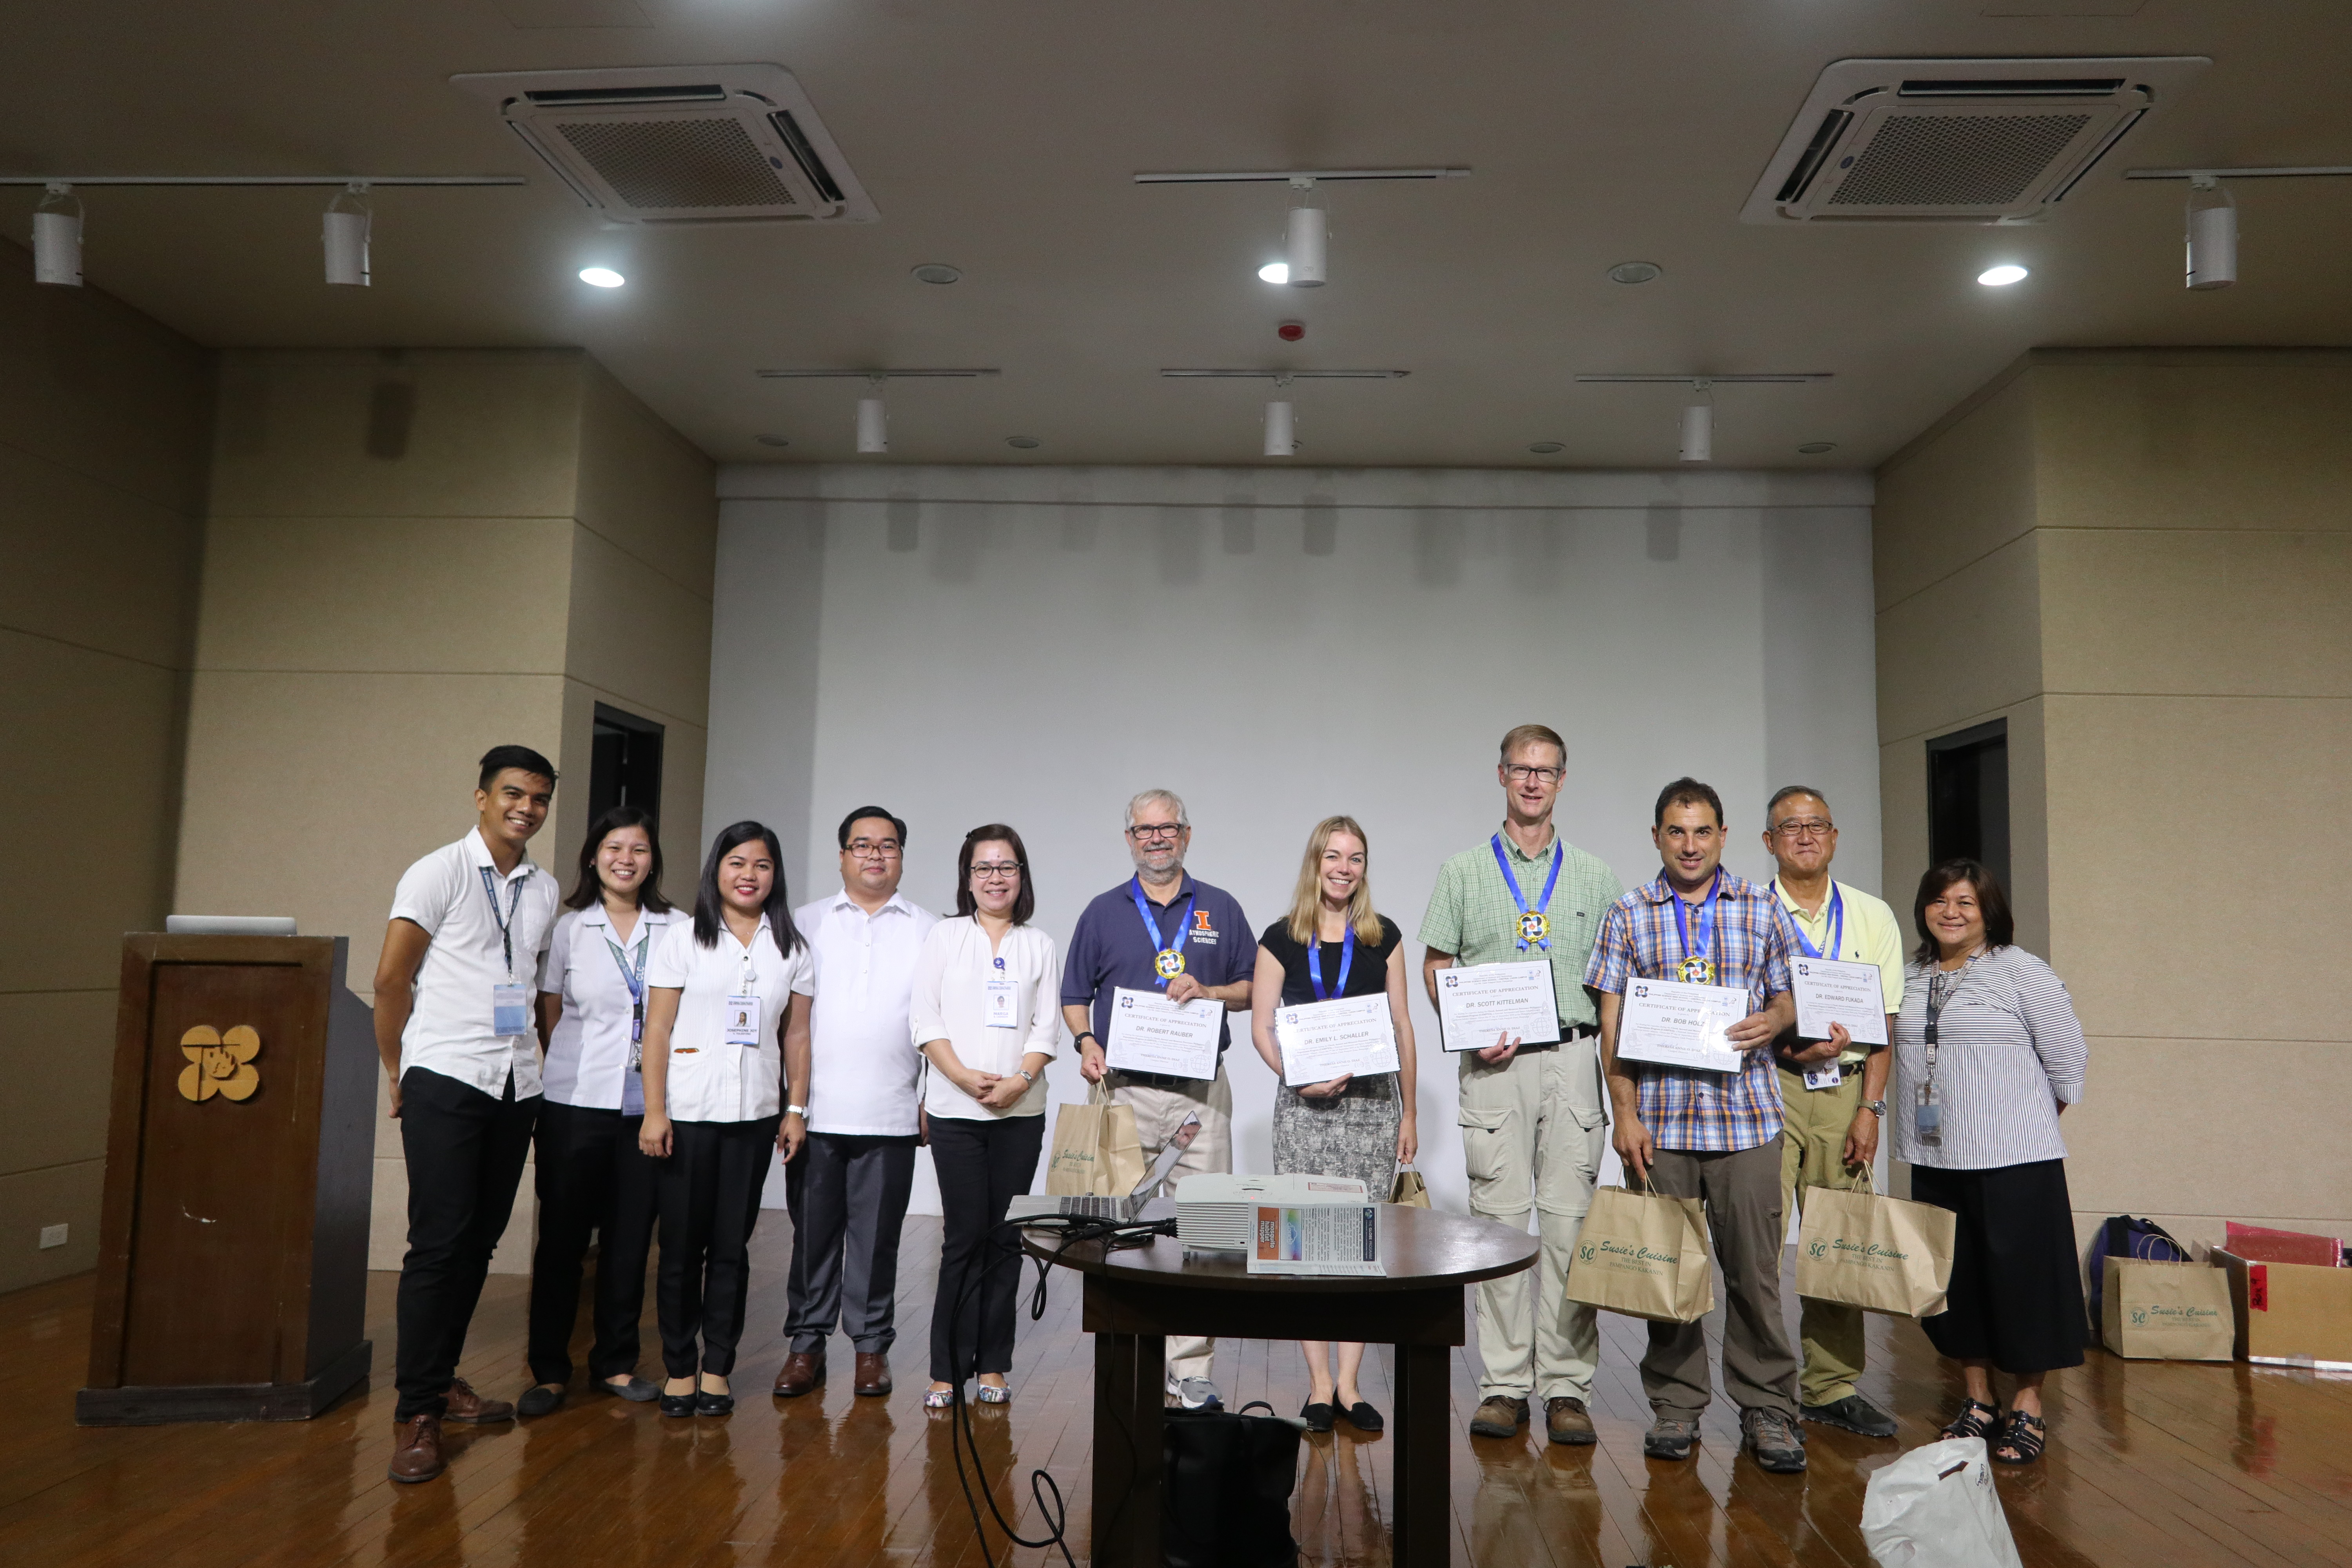 Philippine Science High School Central Luzon Campus (PSHS-CLC) director, Theresa Diaz (right) and teachers pose with NASA CAMP2Ex team holding certificates of appreciation after their presentation at the school on 09 September 2019.